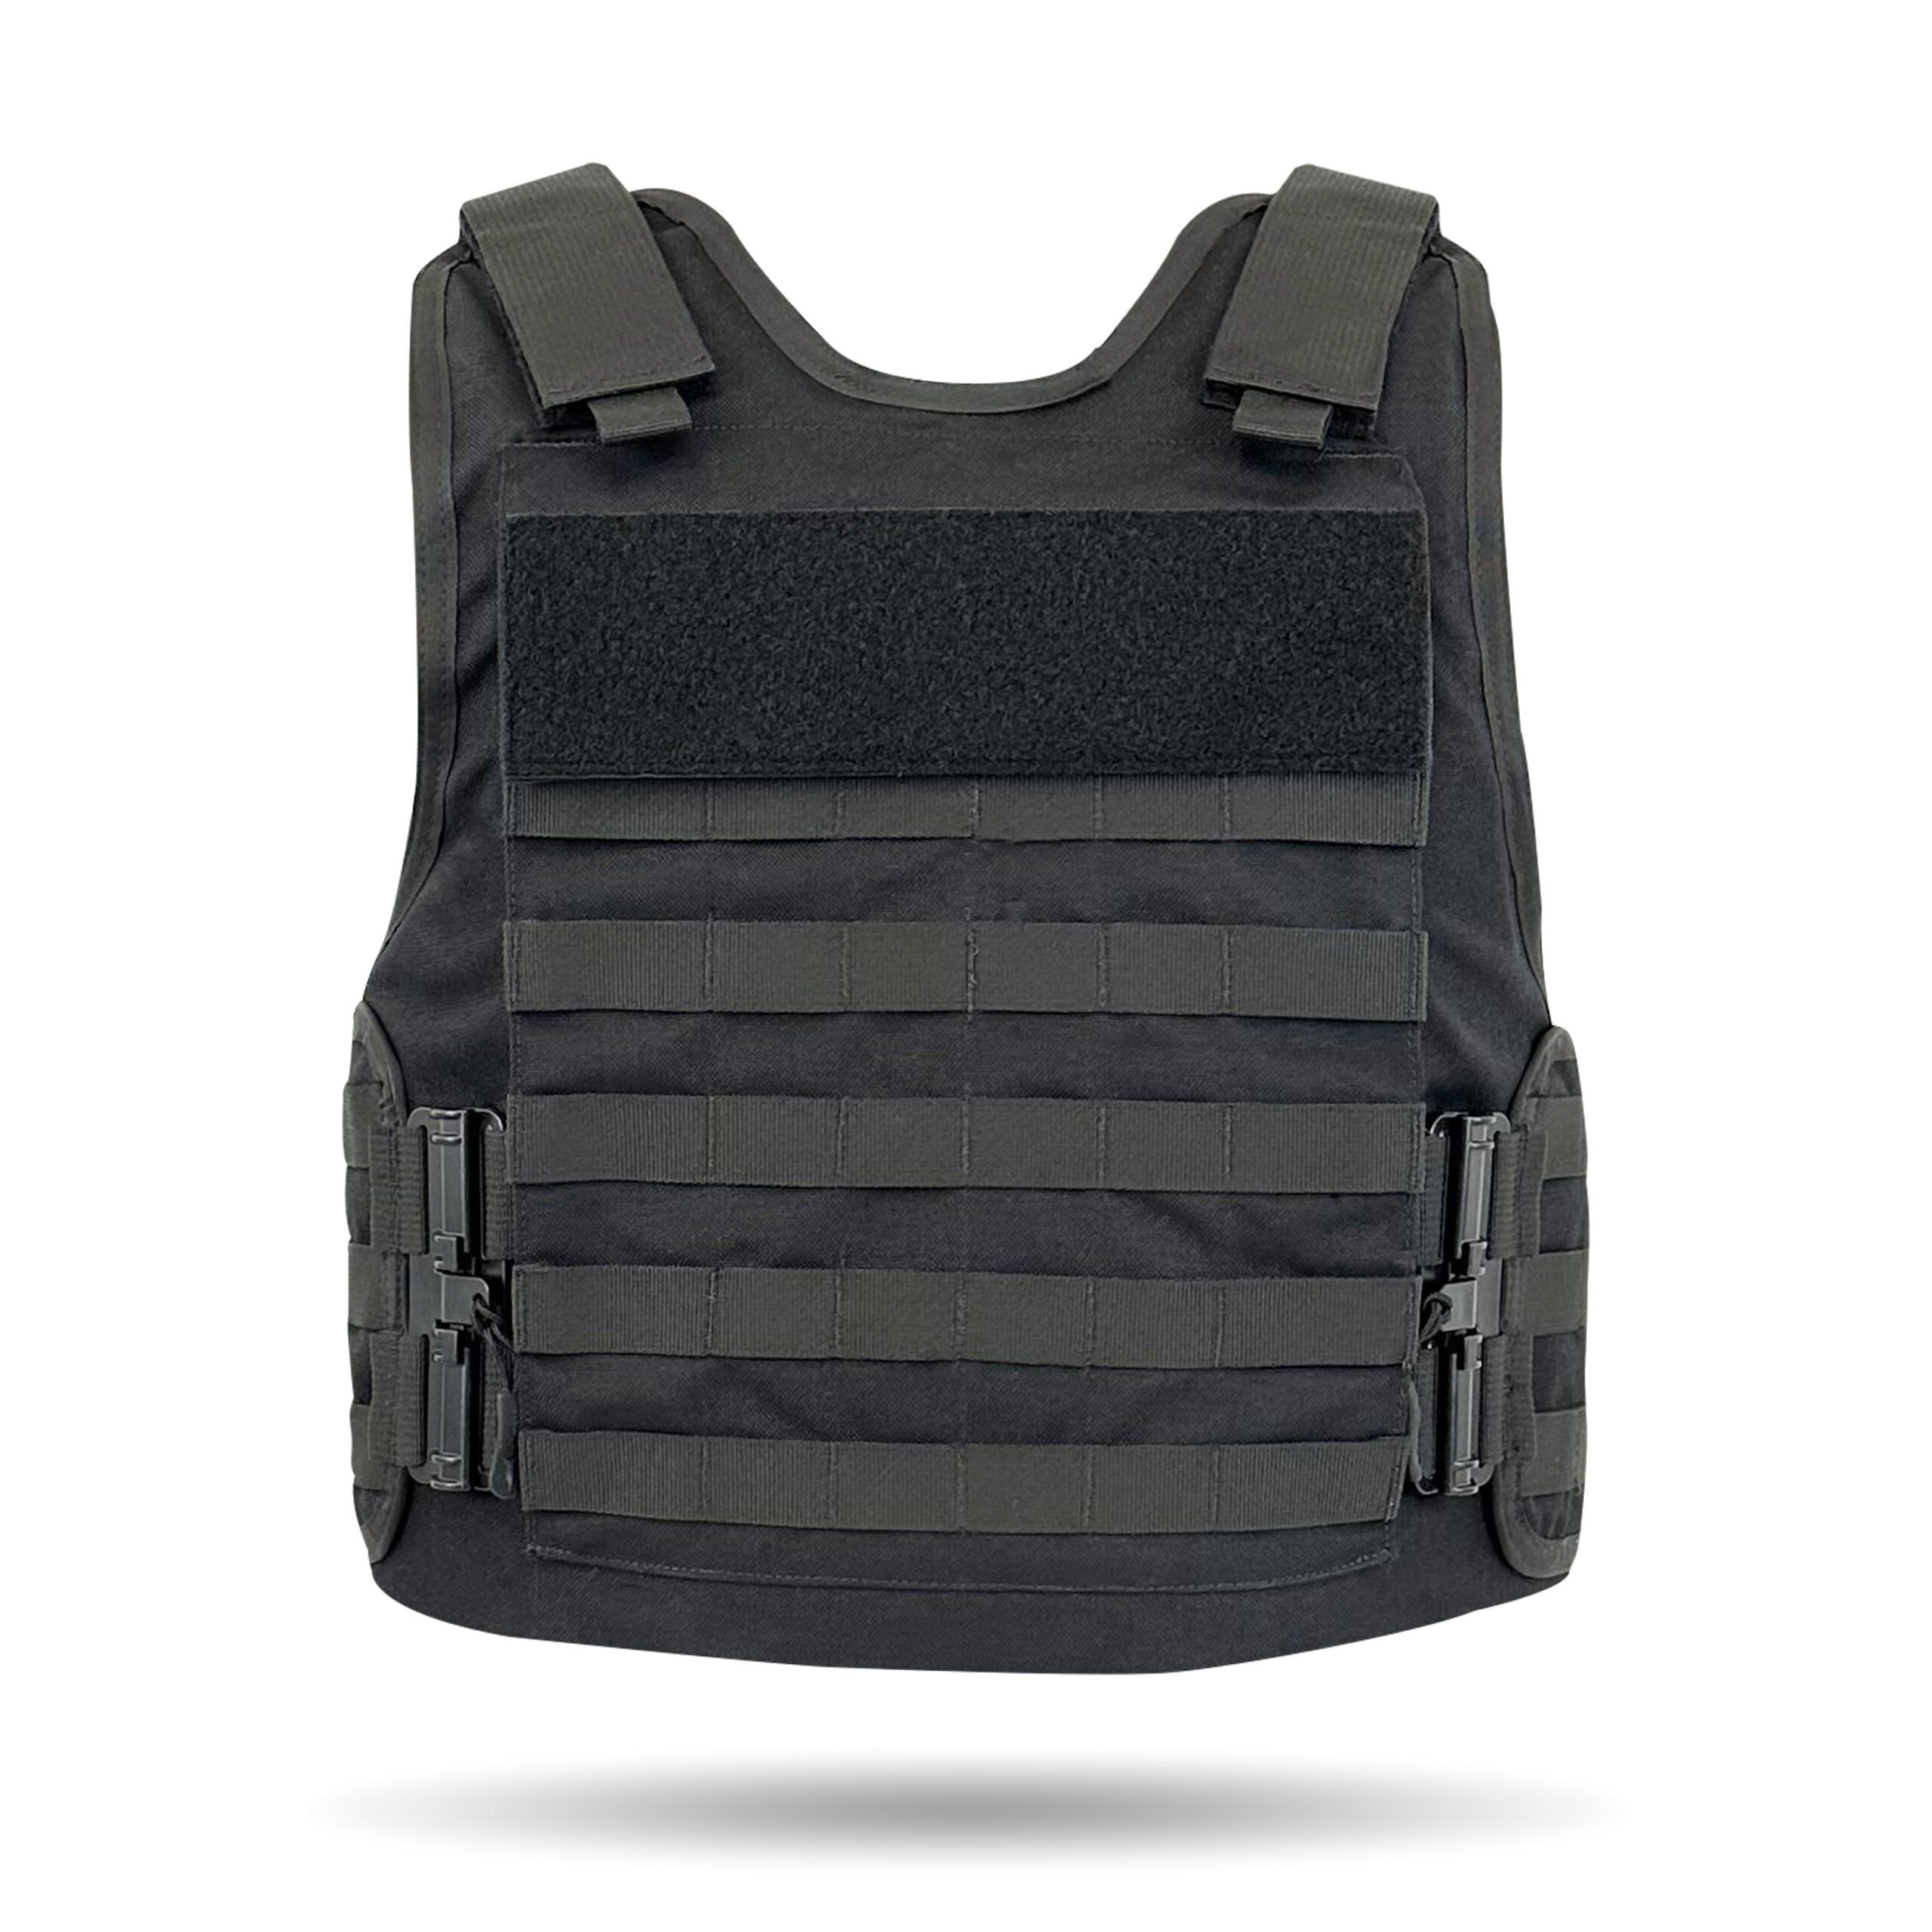 International Tactical with Side Plate Carrier - SupplyCore